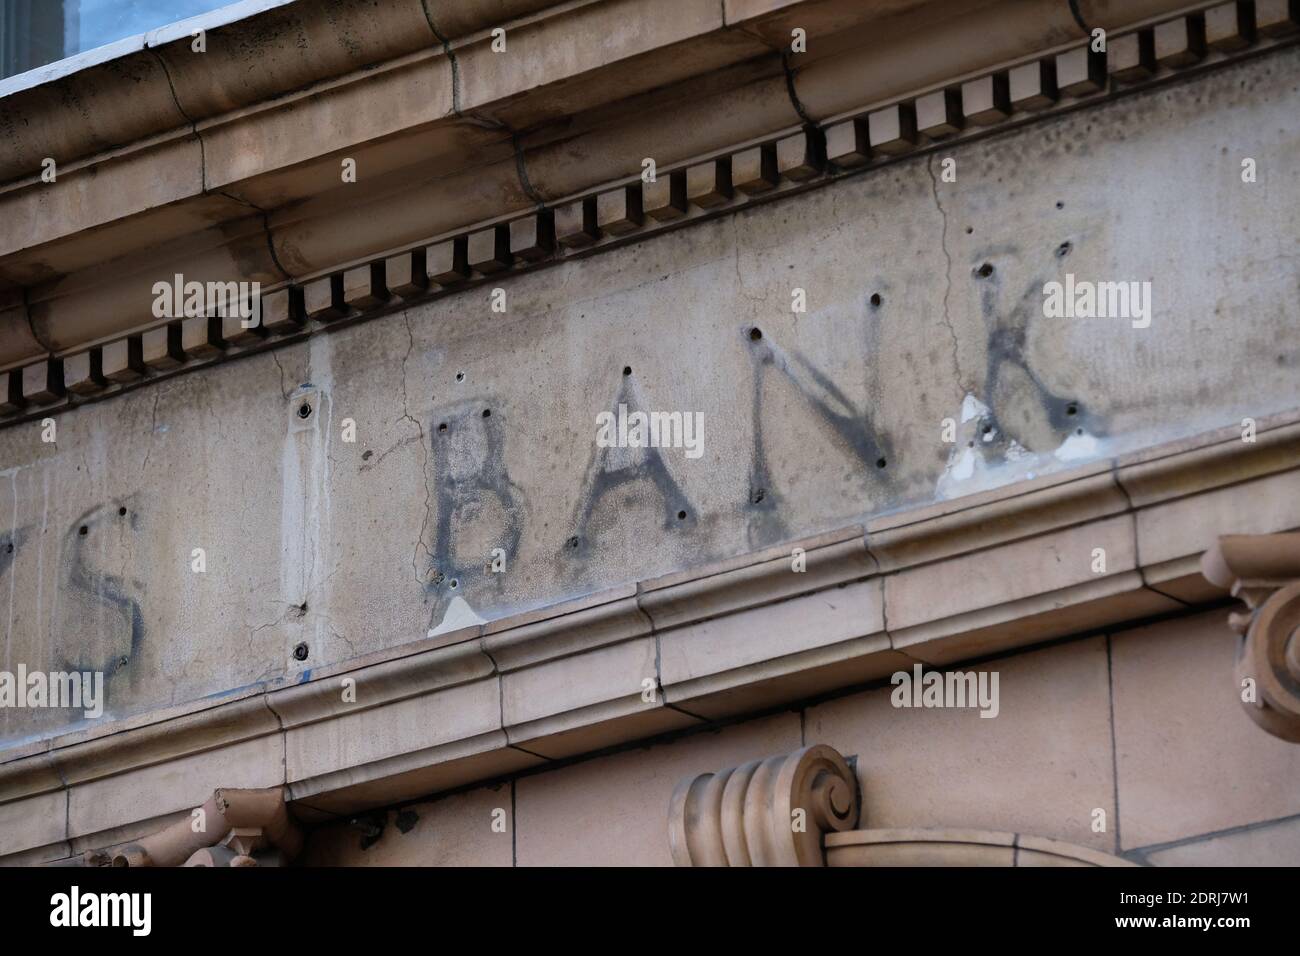 The remains of a sign over a former branch of Barclays Bank, now closed, in Kew Gardens, south west London. Stock Photo